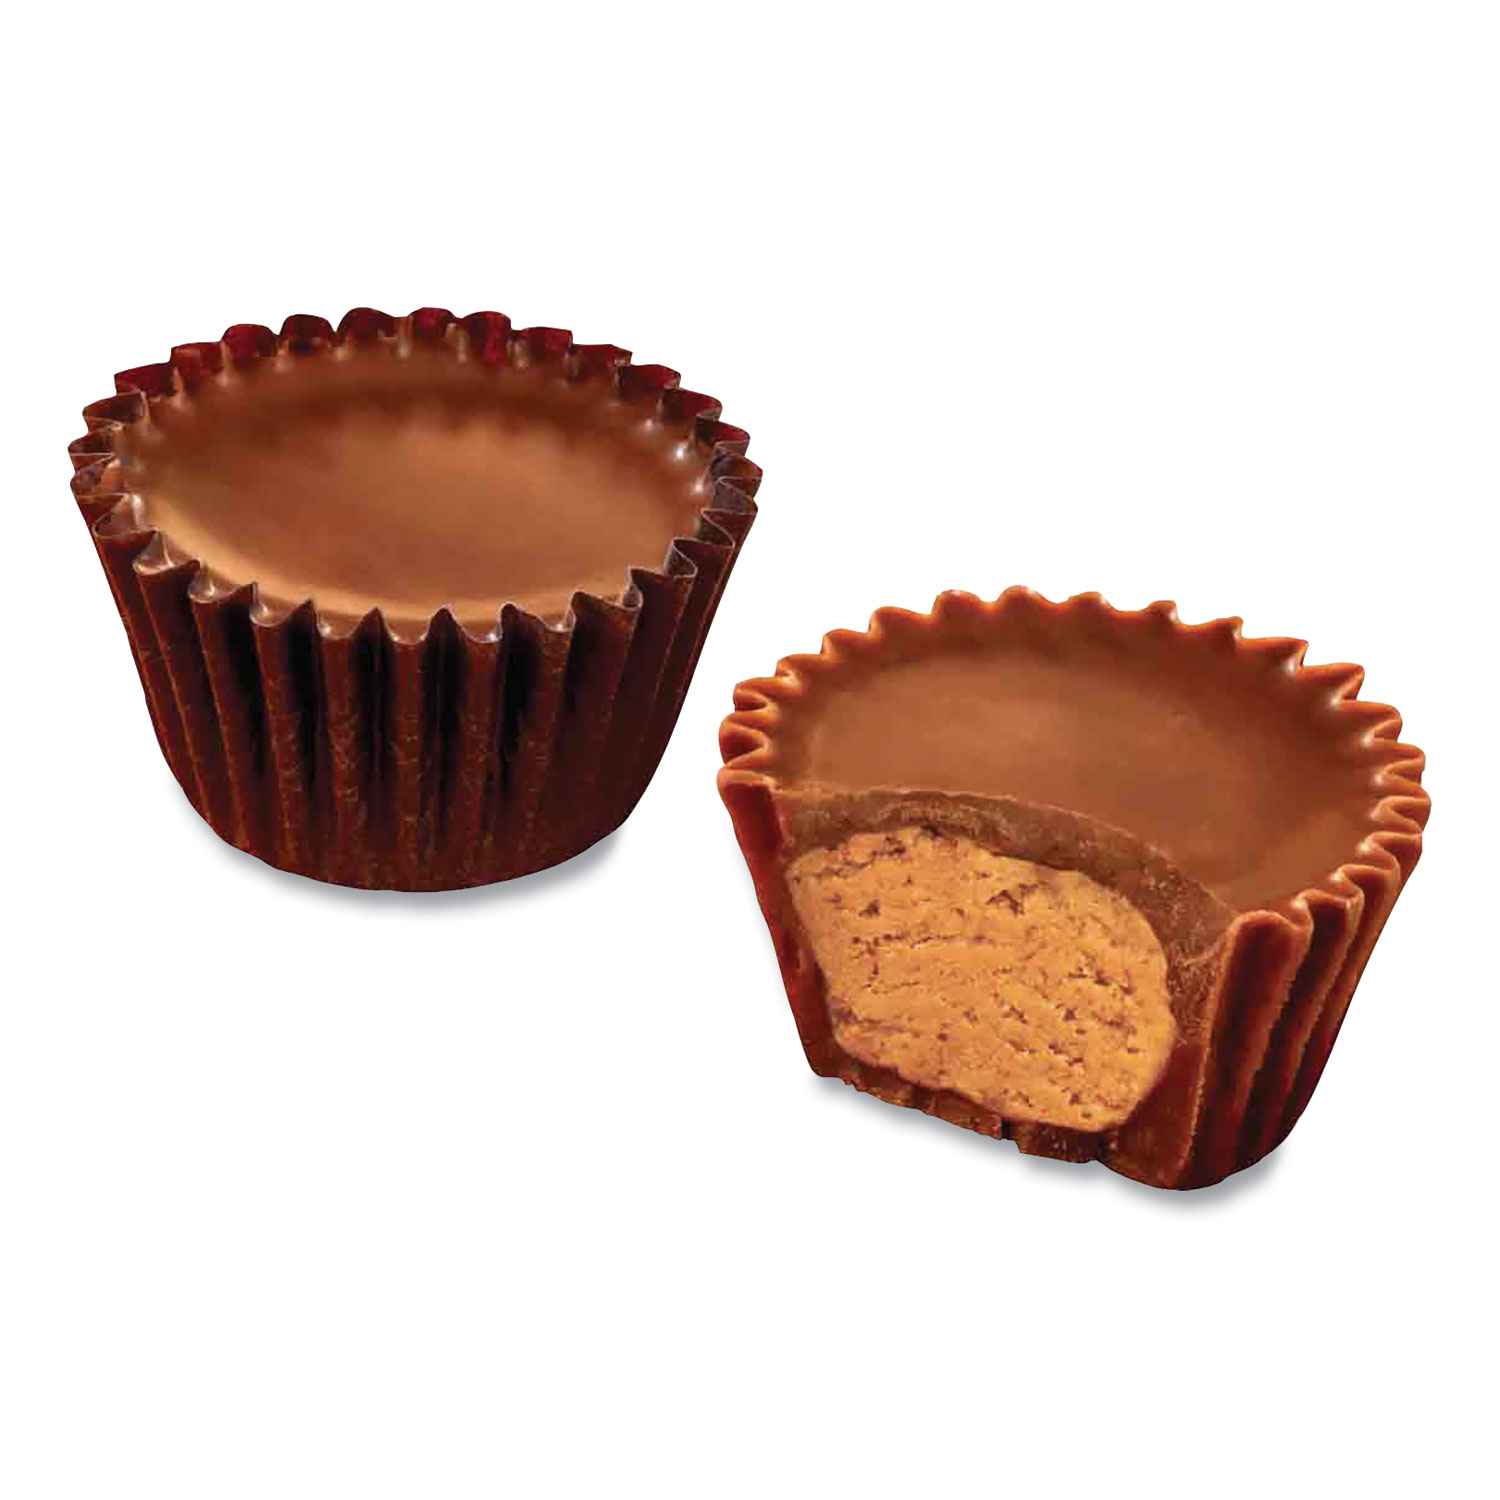  Reese's 42611 Peanut Butter Cups Miniatures Bulk Box, Milk Chocolate, 105 Pieces, 32.55 oz Box, Free Delivery in 1-4 Business Days (GRR24600410) 